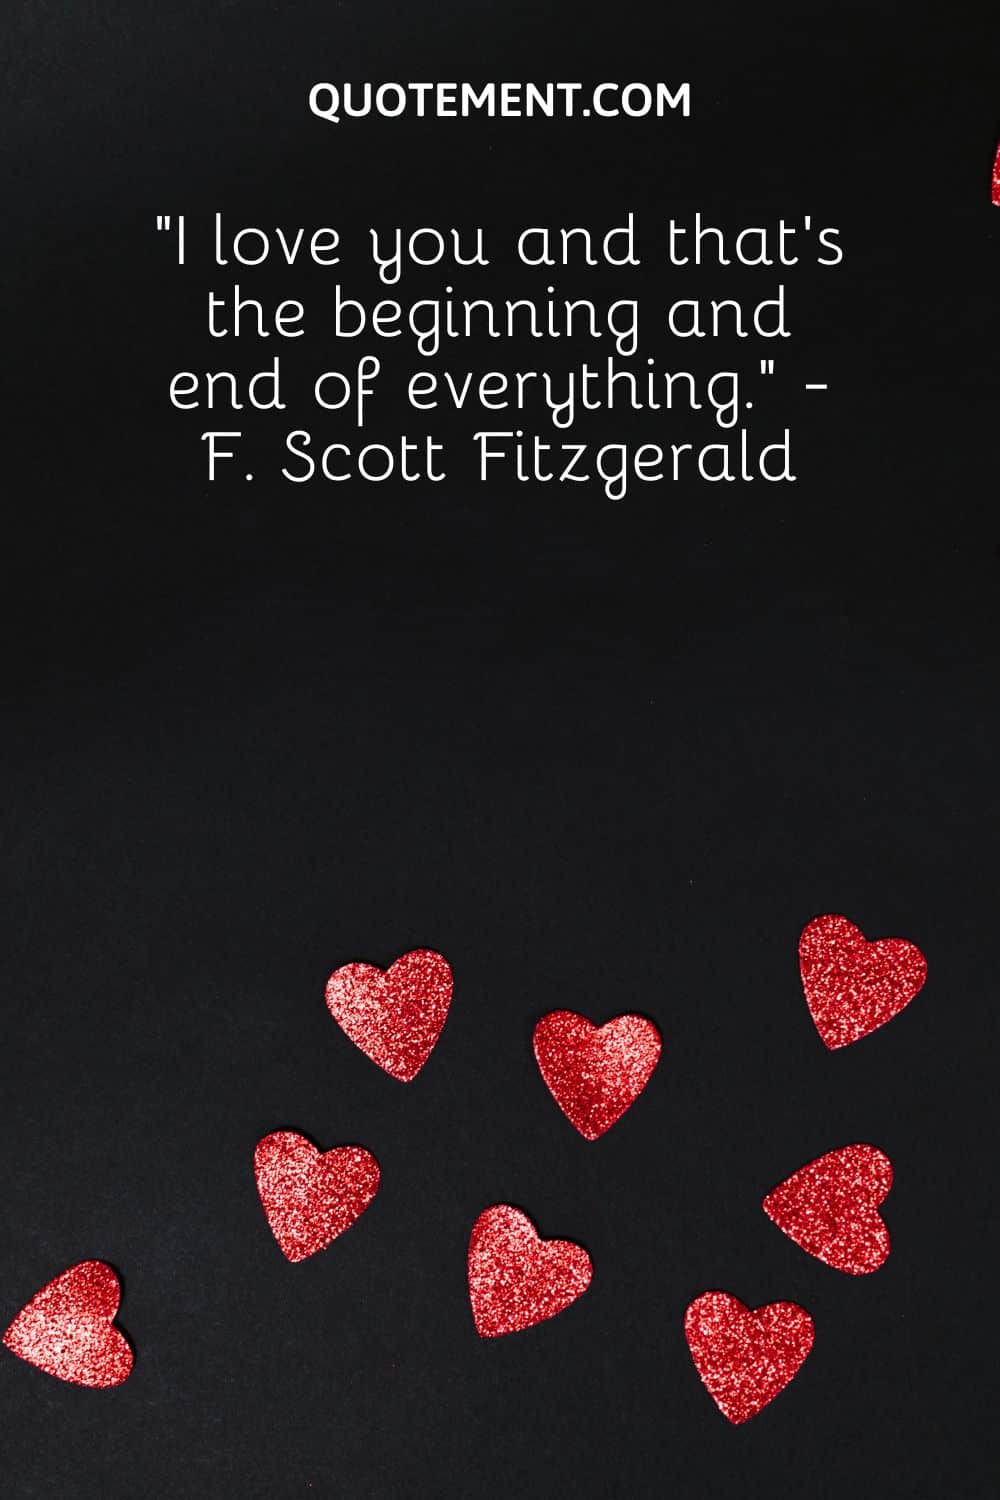 “I love you and that’s the beginning and end of everything.” - F. Scott Fitzgerald